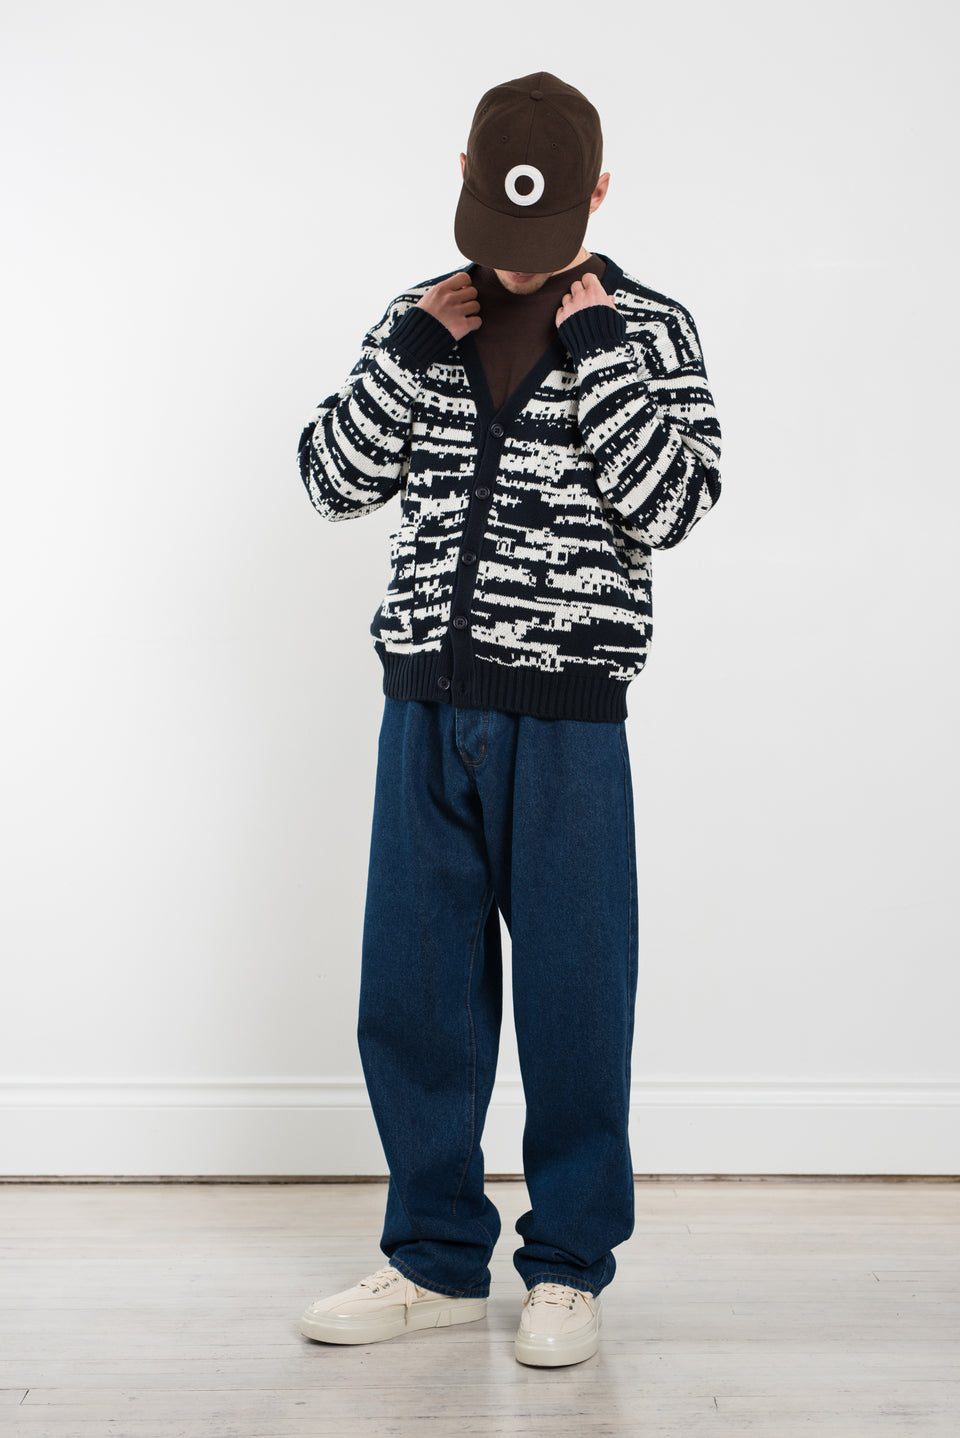 Pop Trading Company SS22 Gilles de Brock Knitted Cardigan Navy / Off-White Calculus Victoria BC Canada